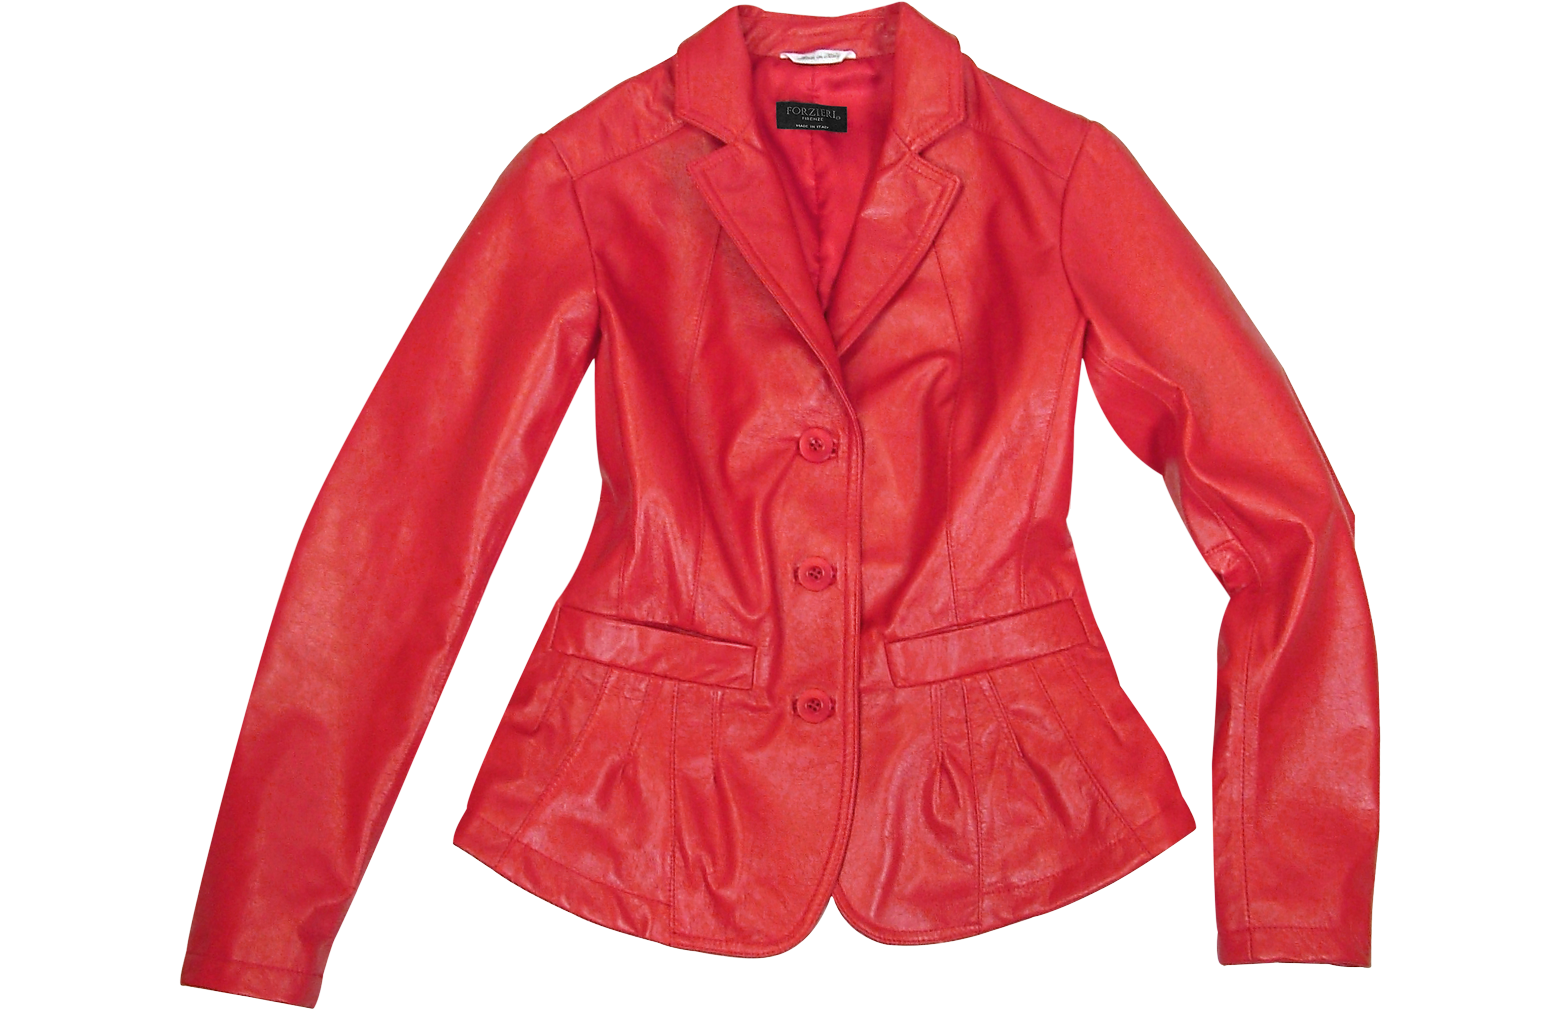 Forzieri Women's Red Fitted Leather Jacket 4 (USA) - 40 (IT) at FORZIERI